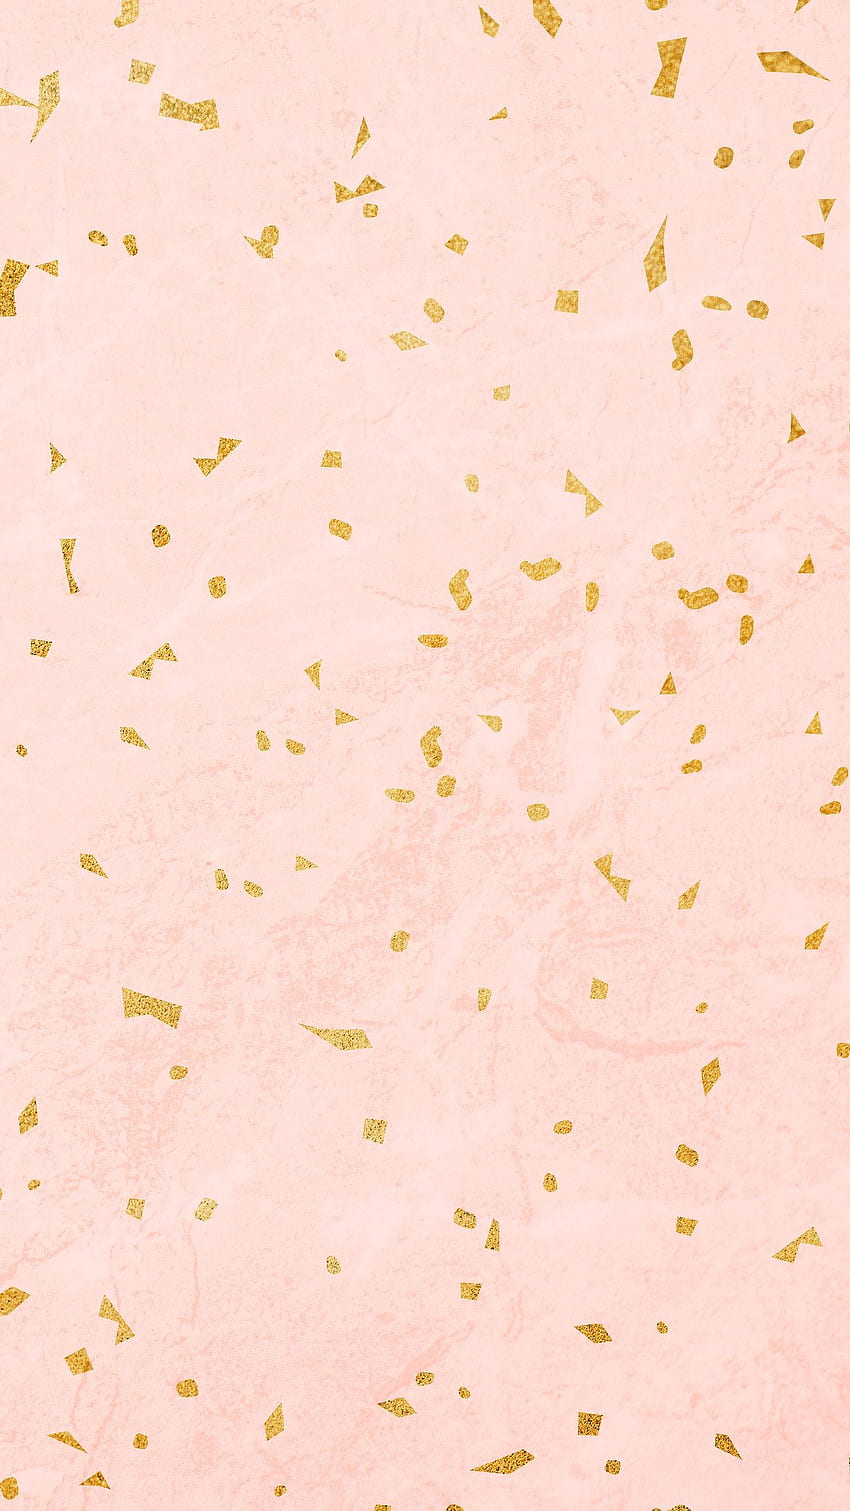 Gold confetti coral pink marble. Royalty illustration HD phone wallpaper